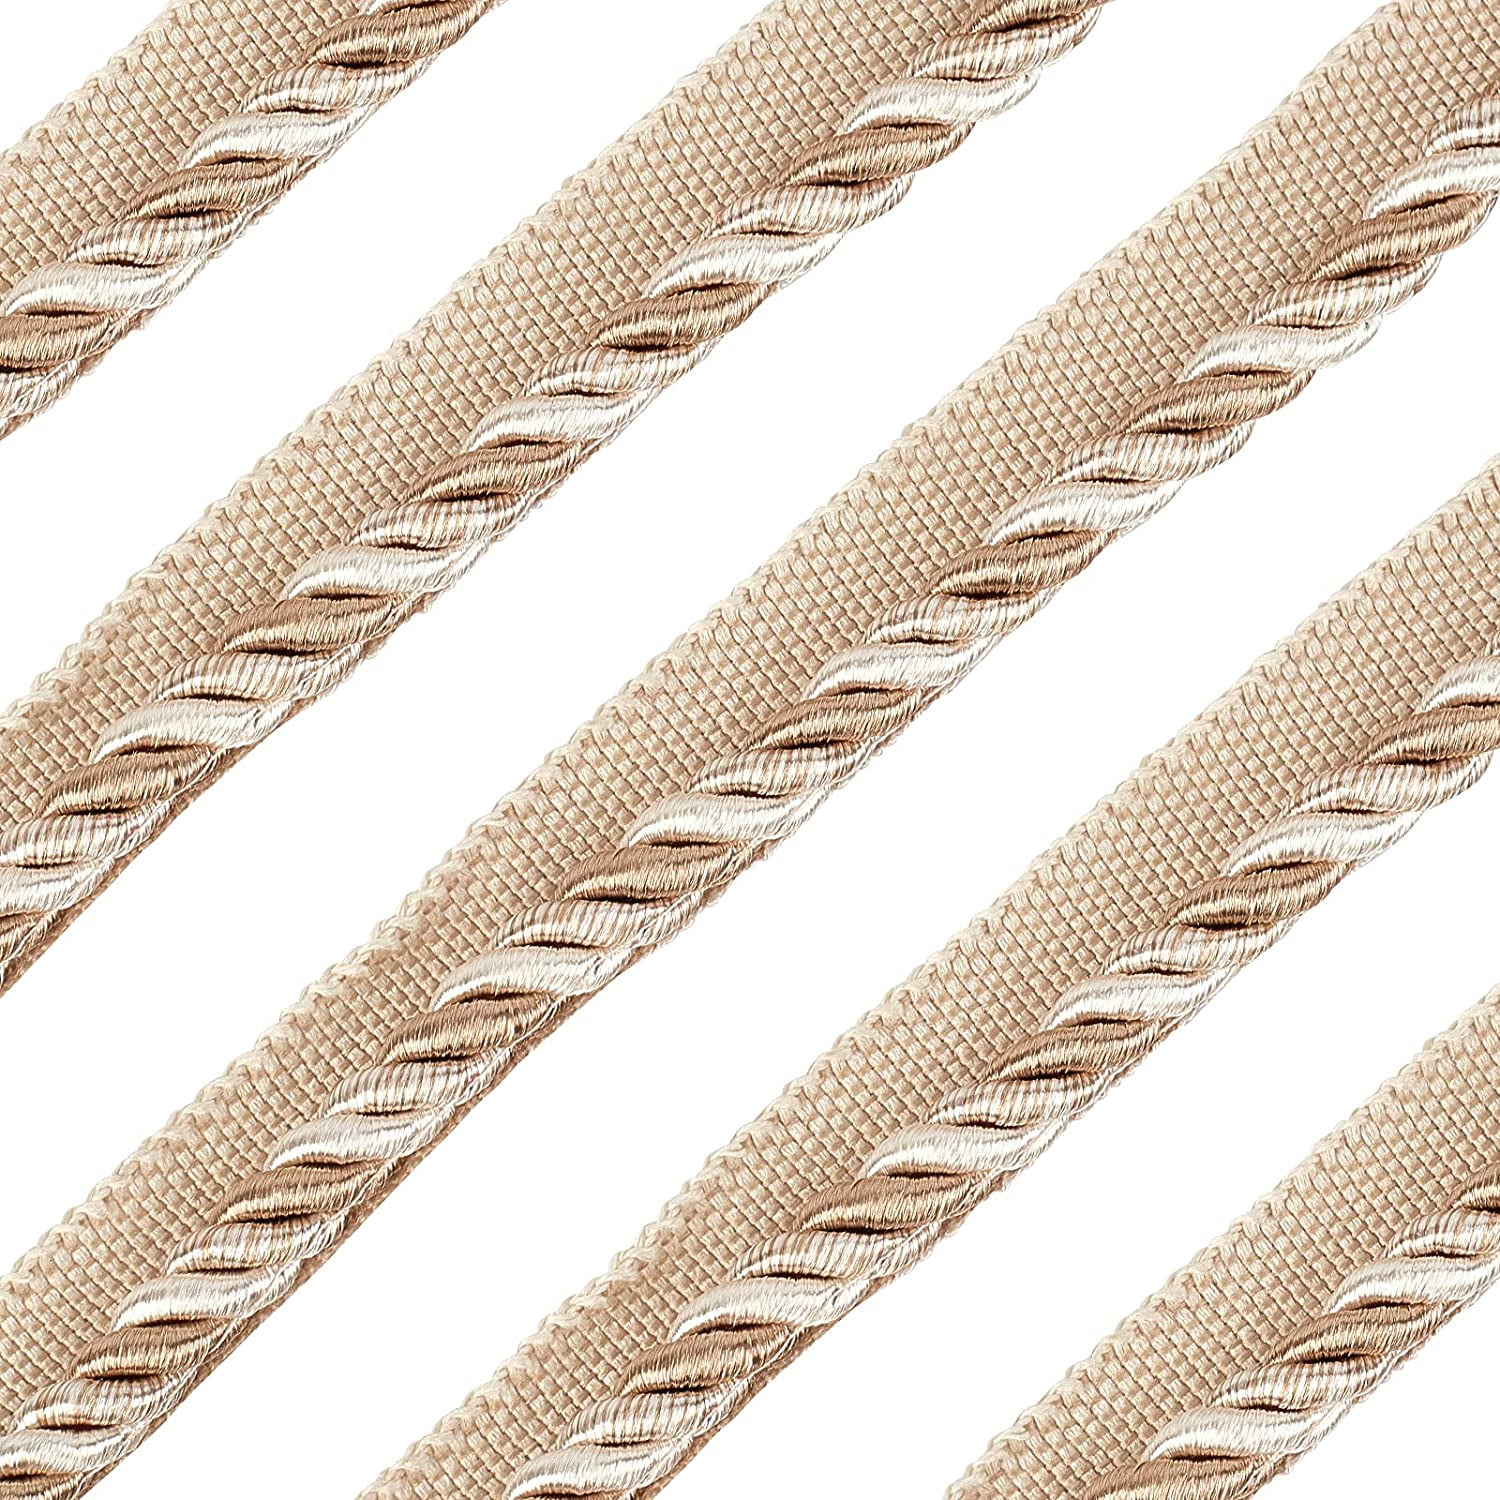 New~WRIGHTS Twisted~**GOLD CORD TRIM**~3/8 W~18 YARDS Cording